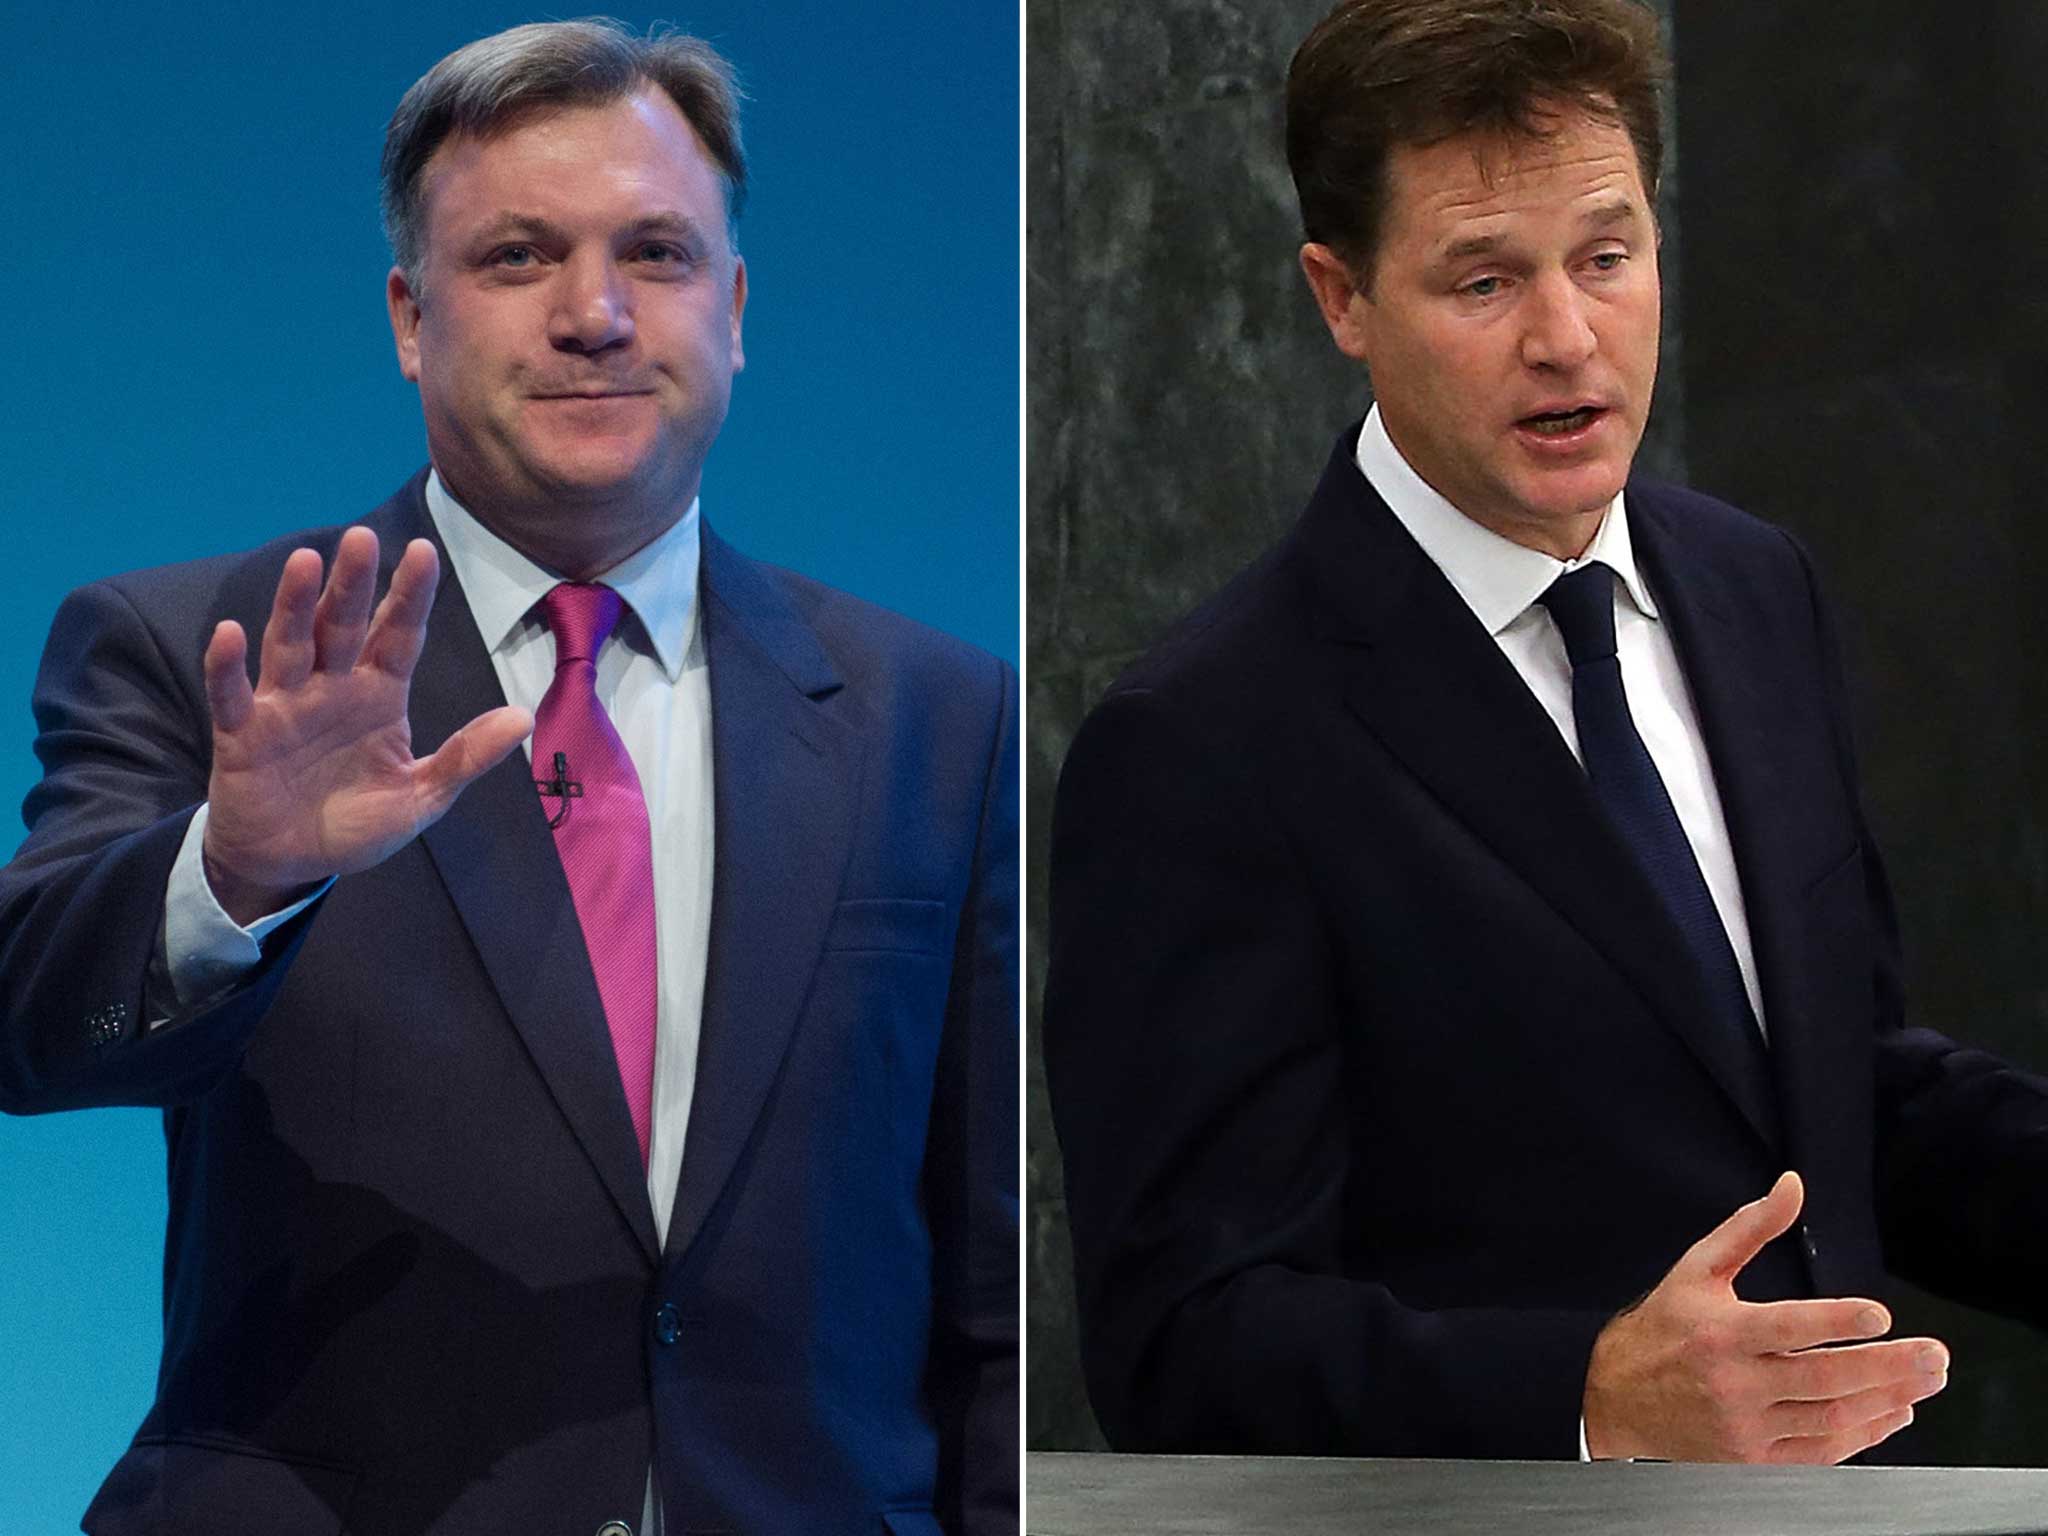 Ed Balls has hinted at a possible coalition with the Lib Dems